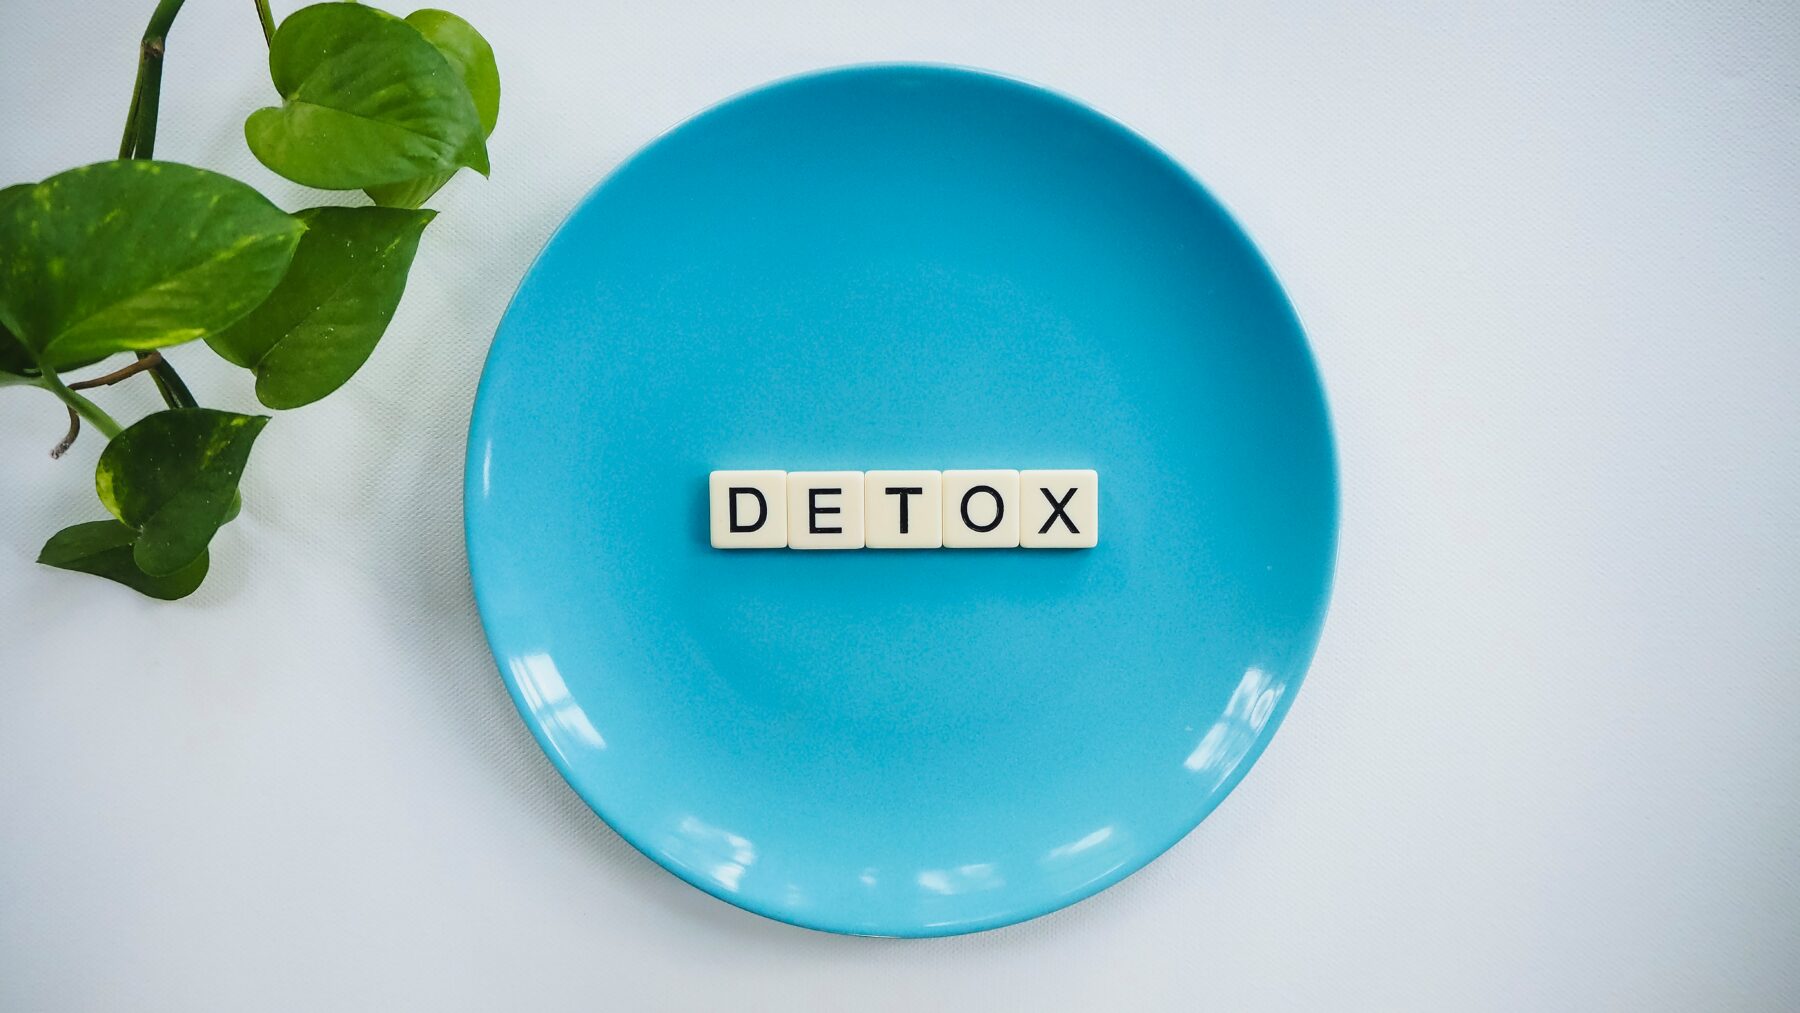 Plate with word detox over it.